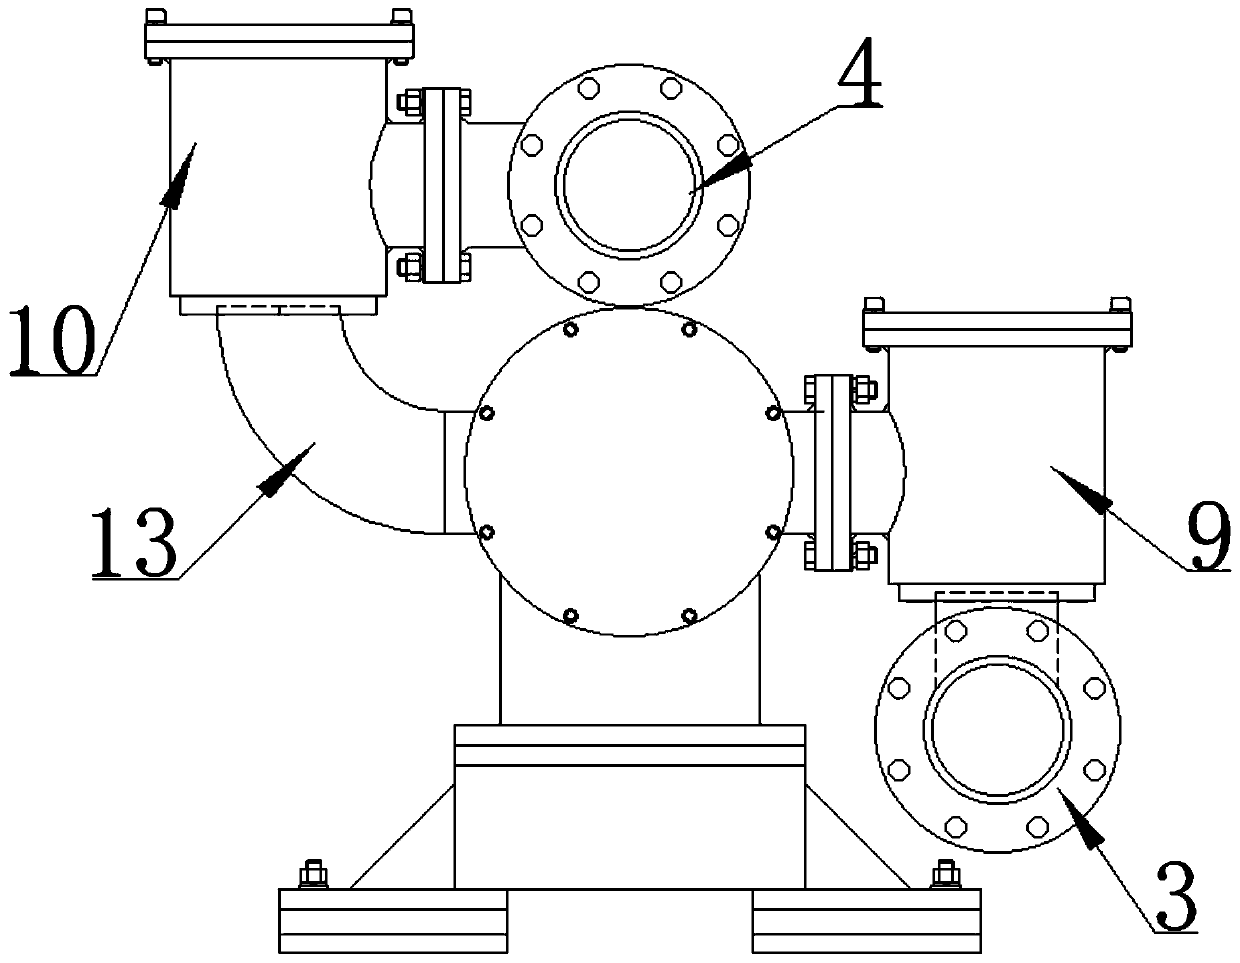 Double-acting four-inlet four-outlet reciprocating pump